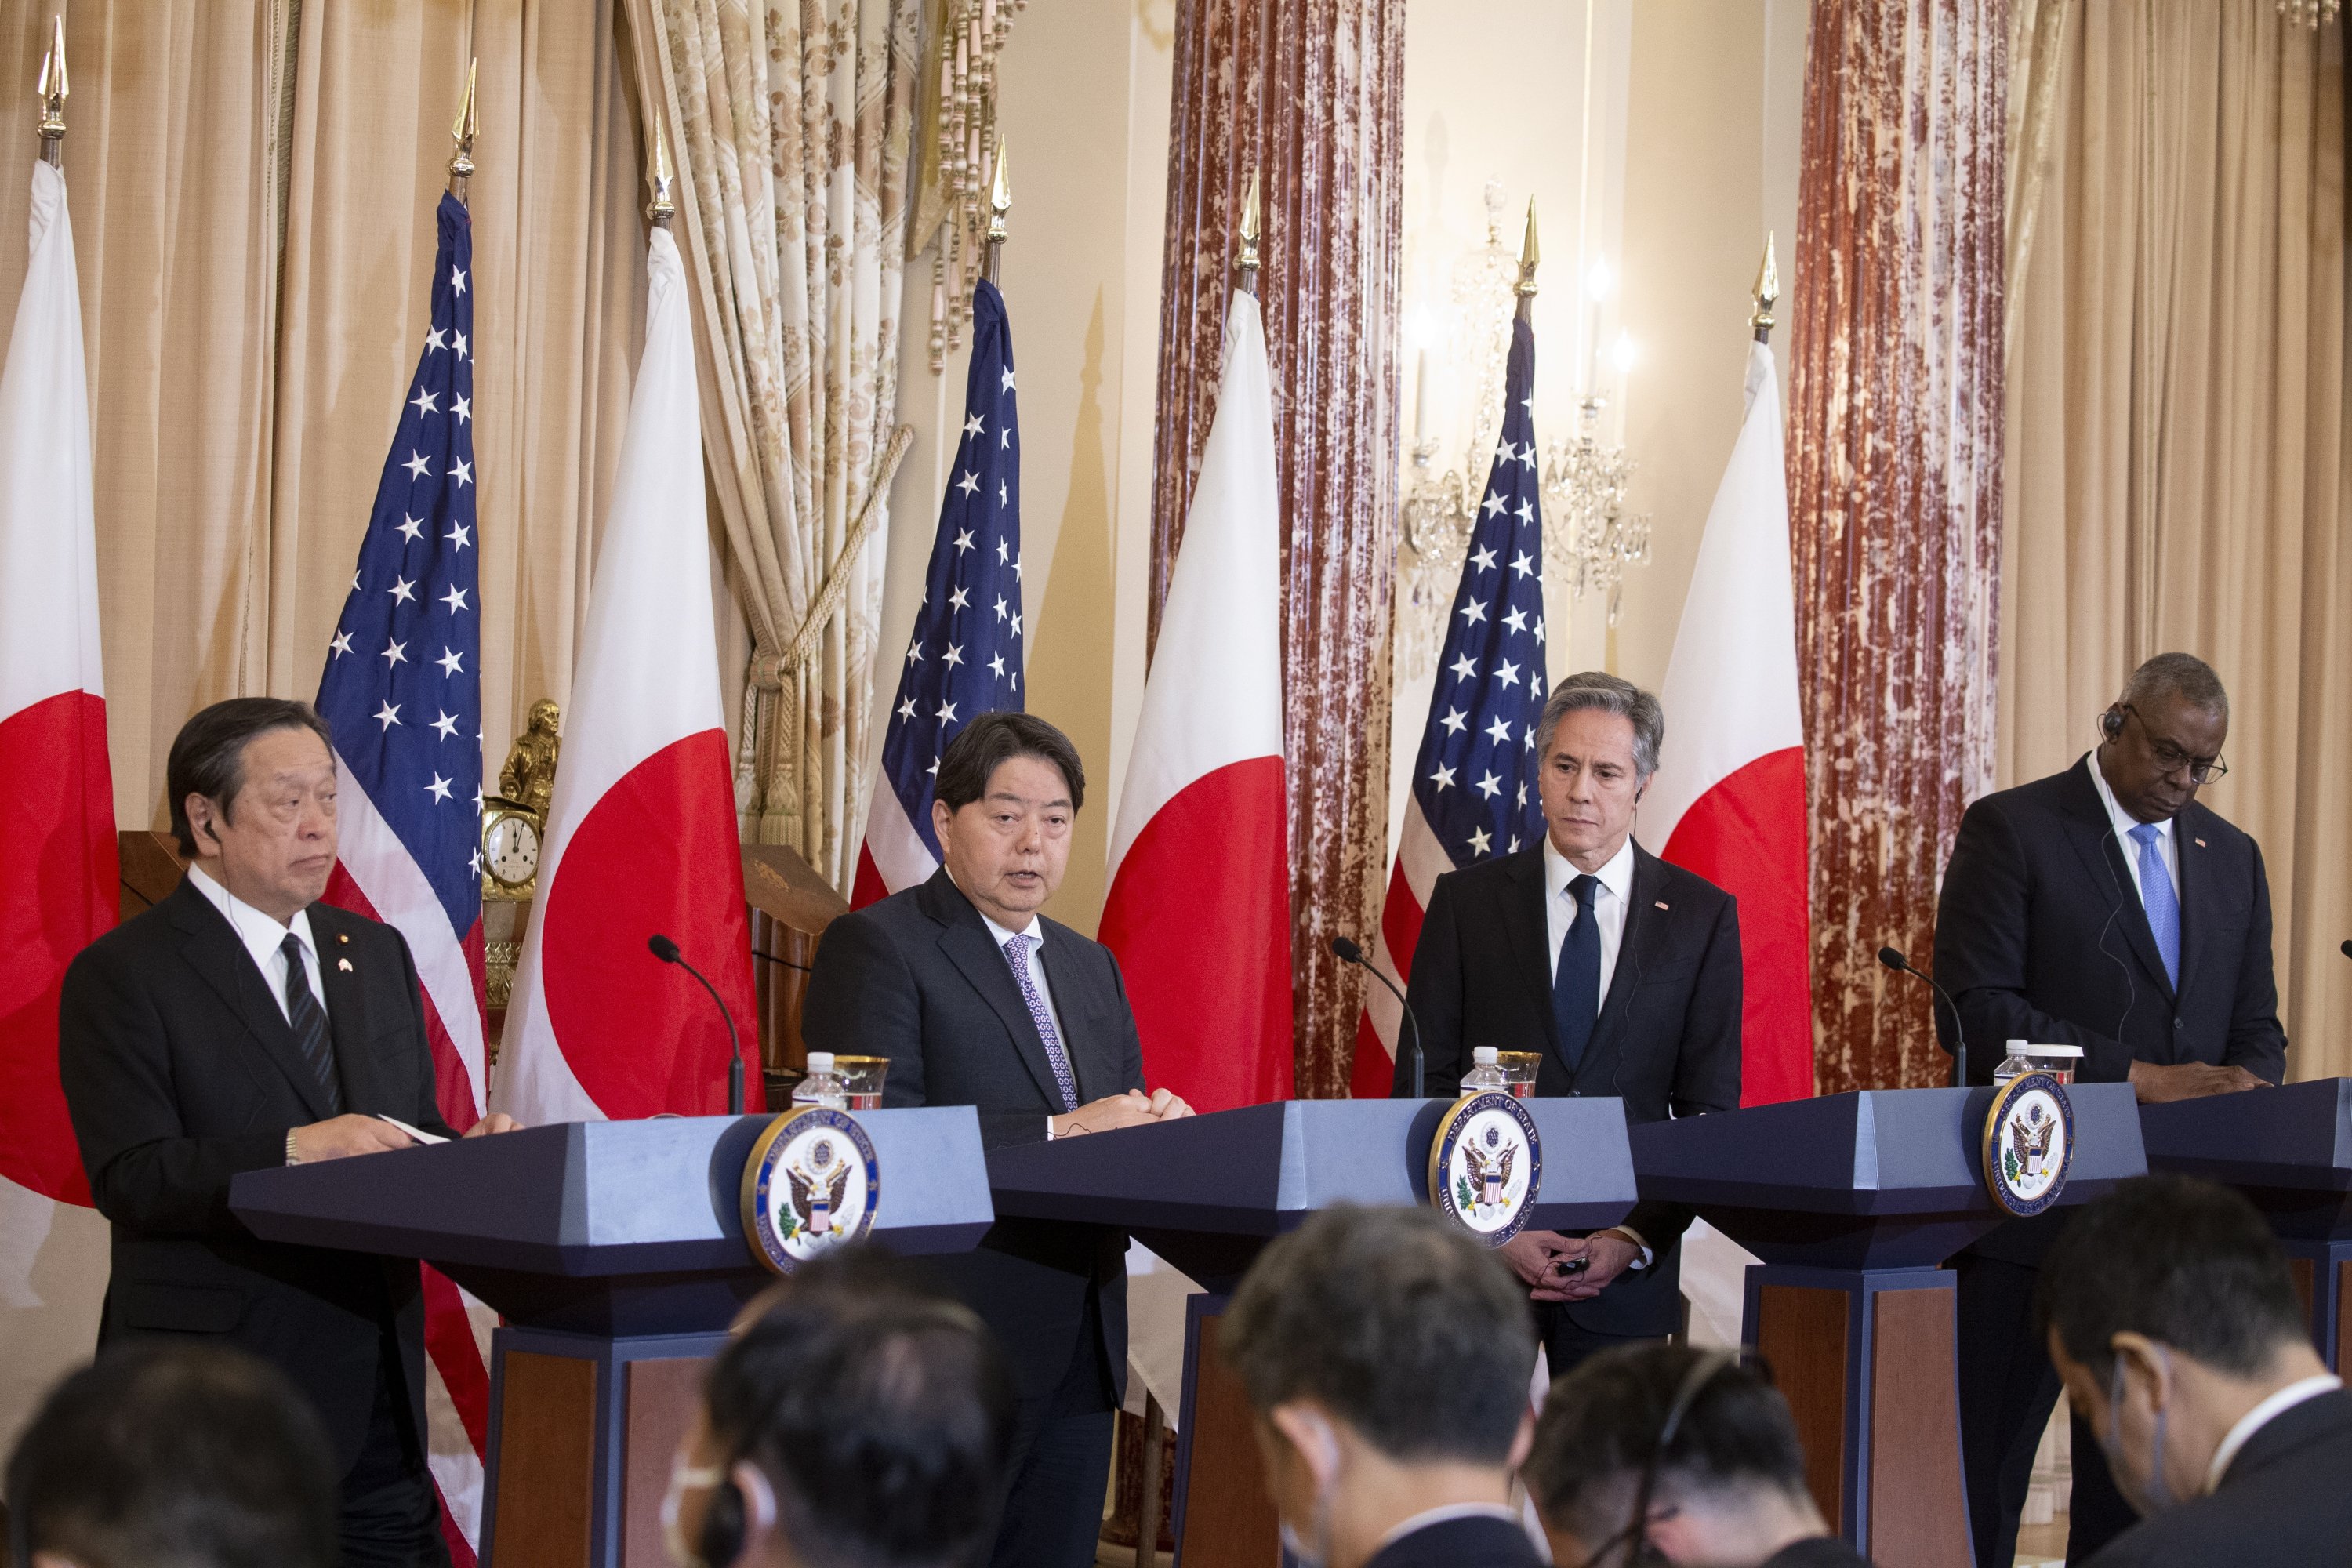 Allies of the United States and Japan reveal plans To enhance security